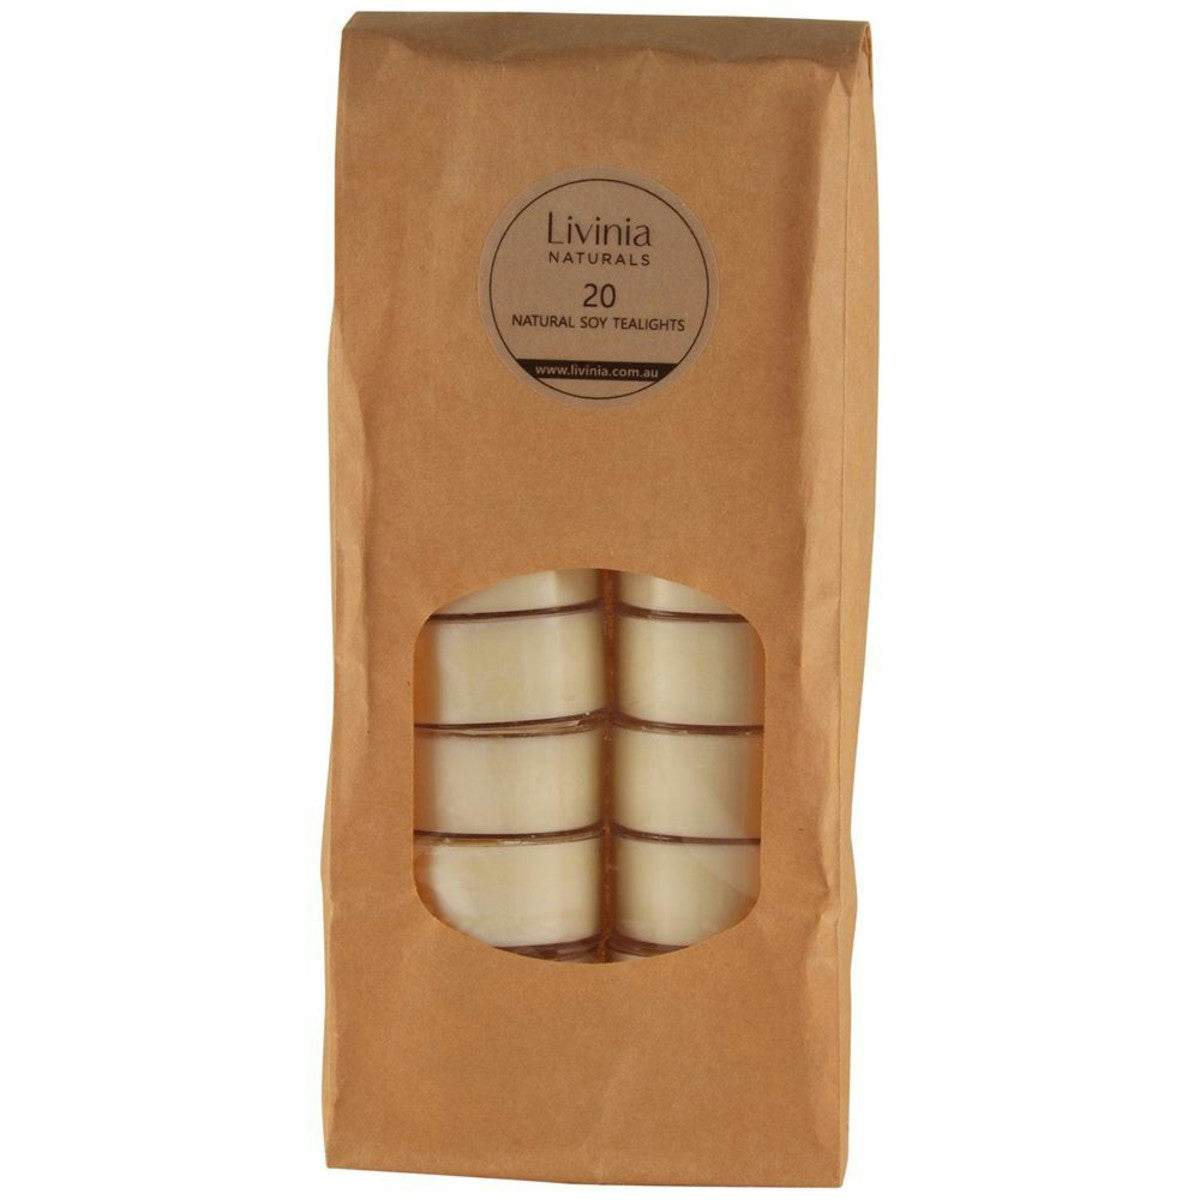 image of Livinia Naturals Soy Tea Light Candles x 20 Pack on white background